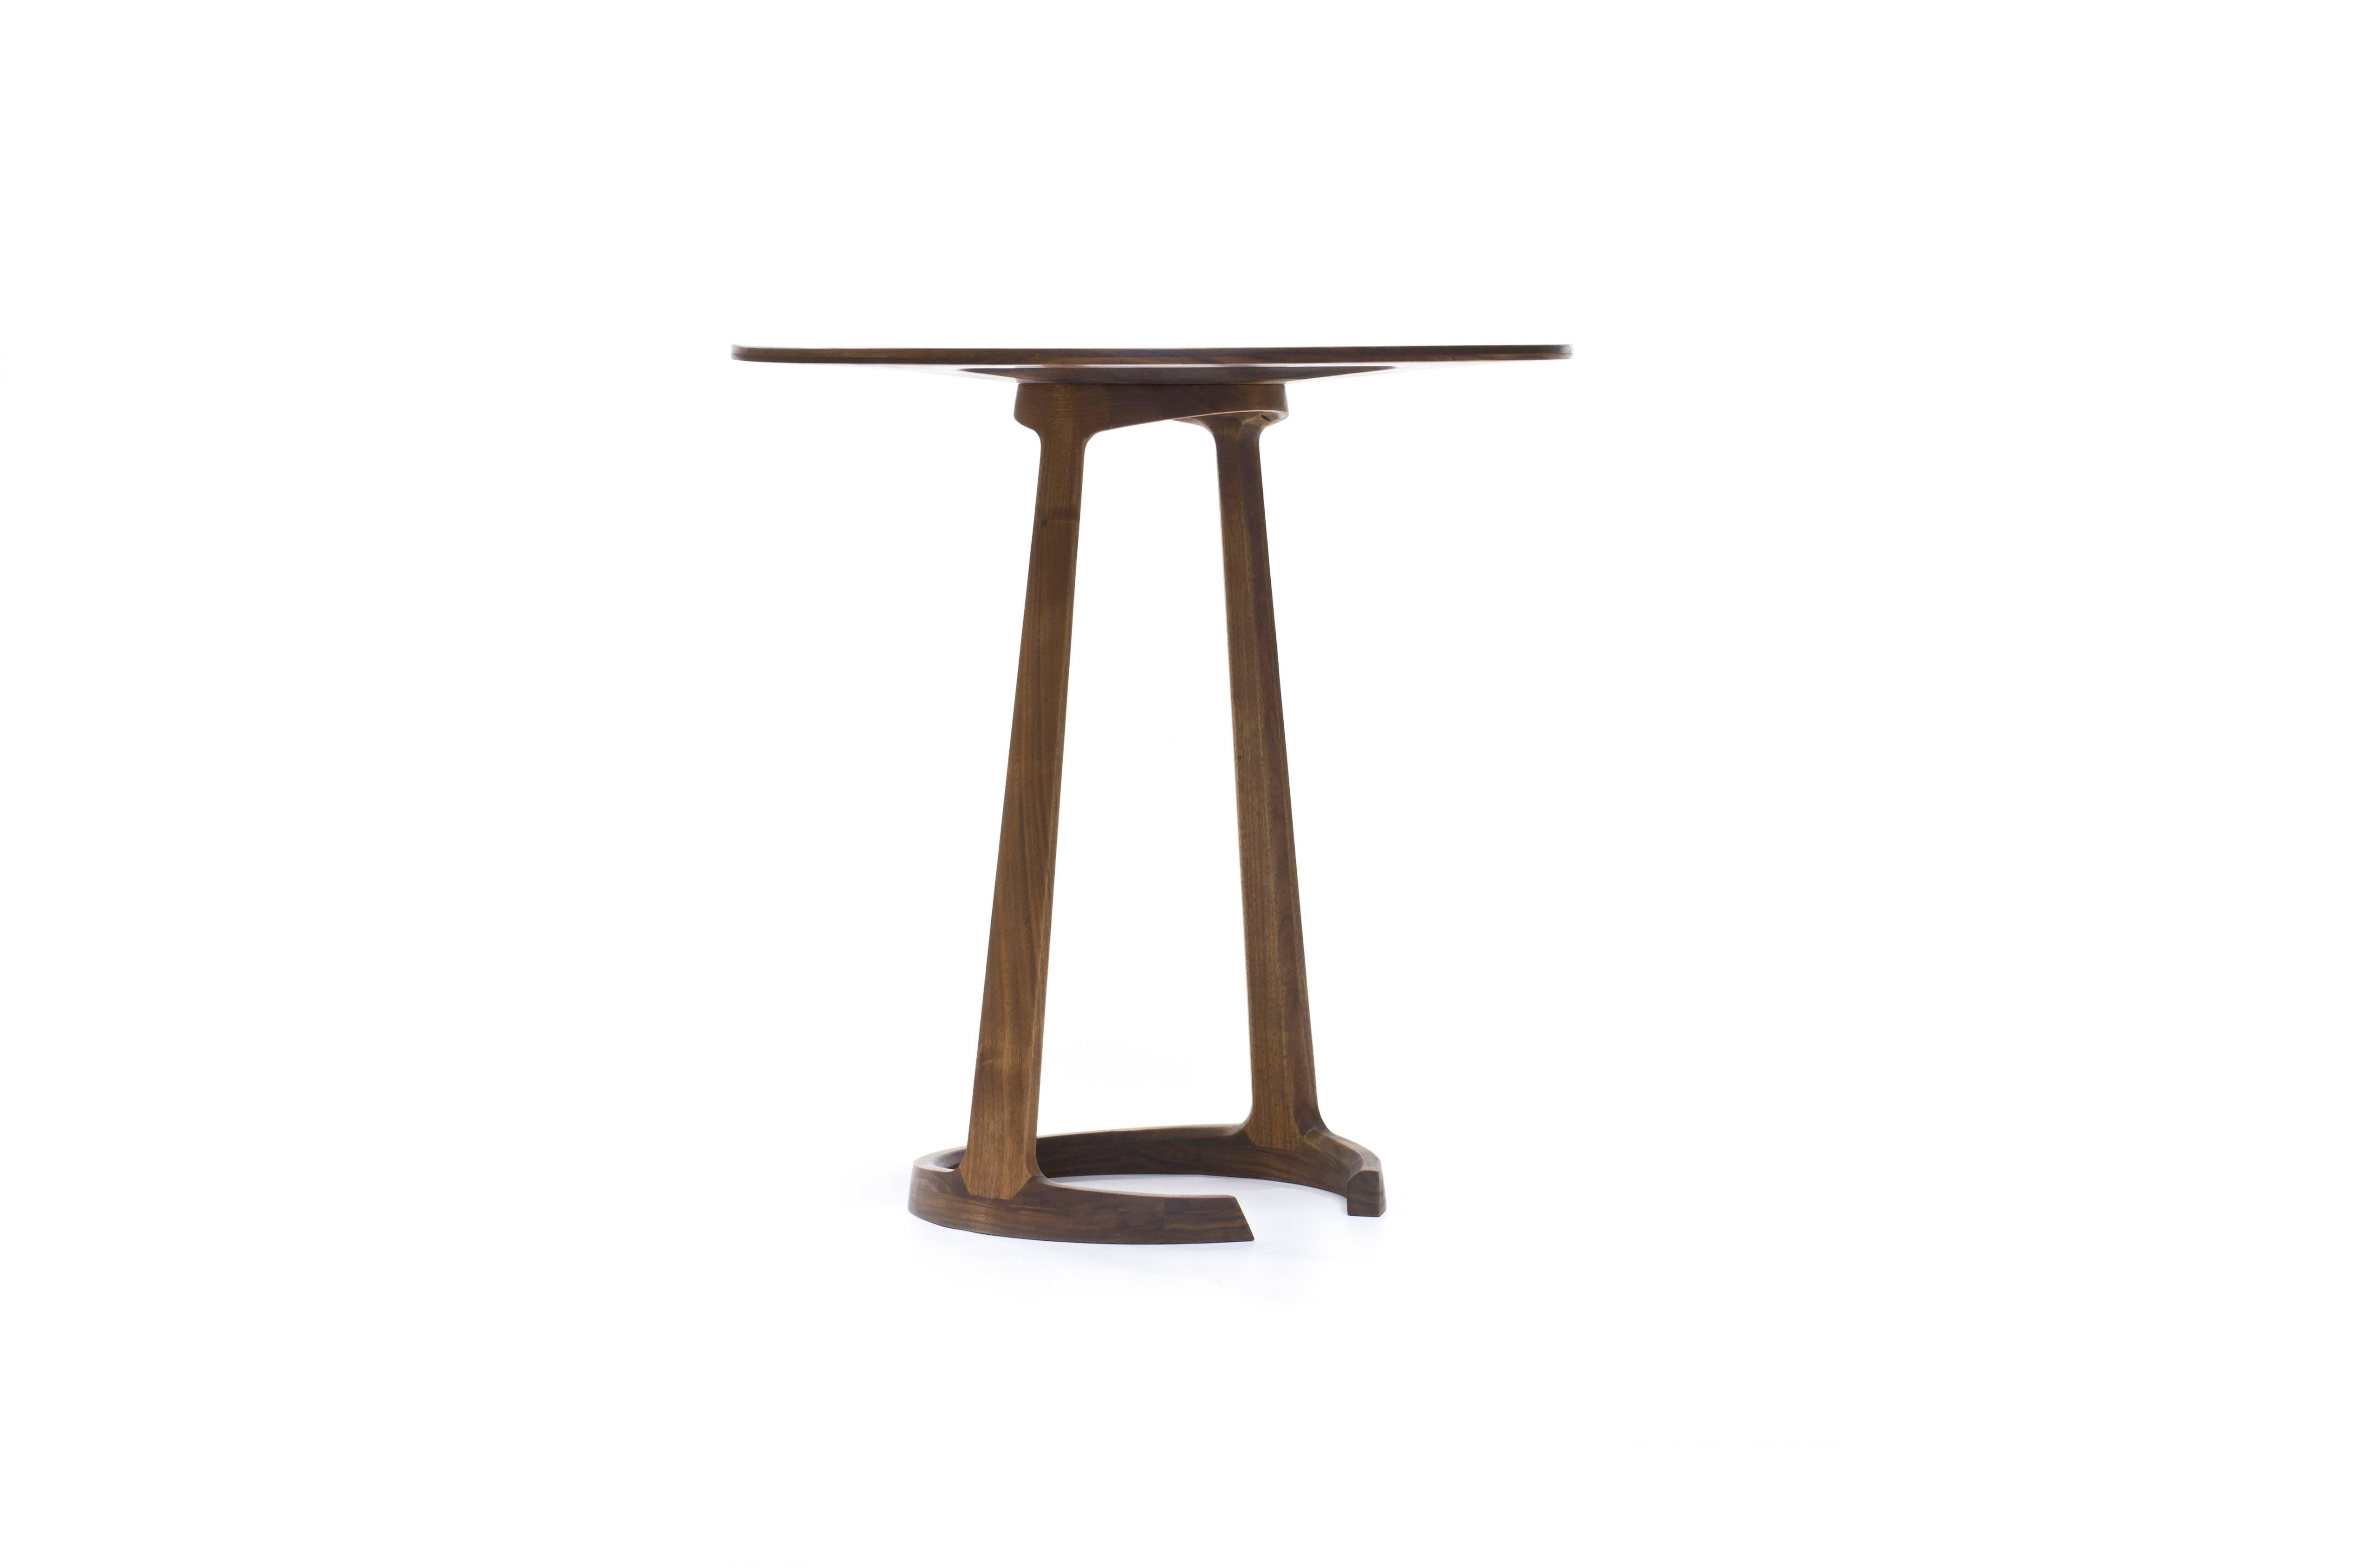 American Repose End Table in Oiled Walnut by Zac Feltoon for Wooda For Sale